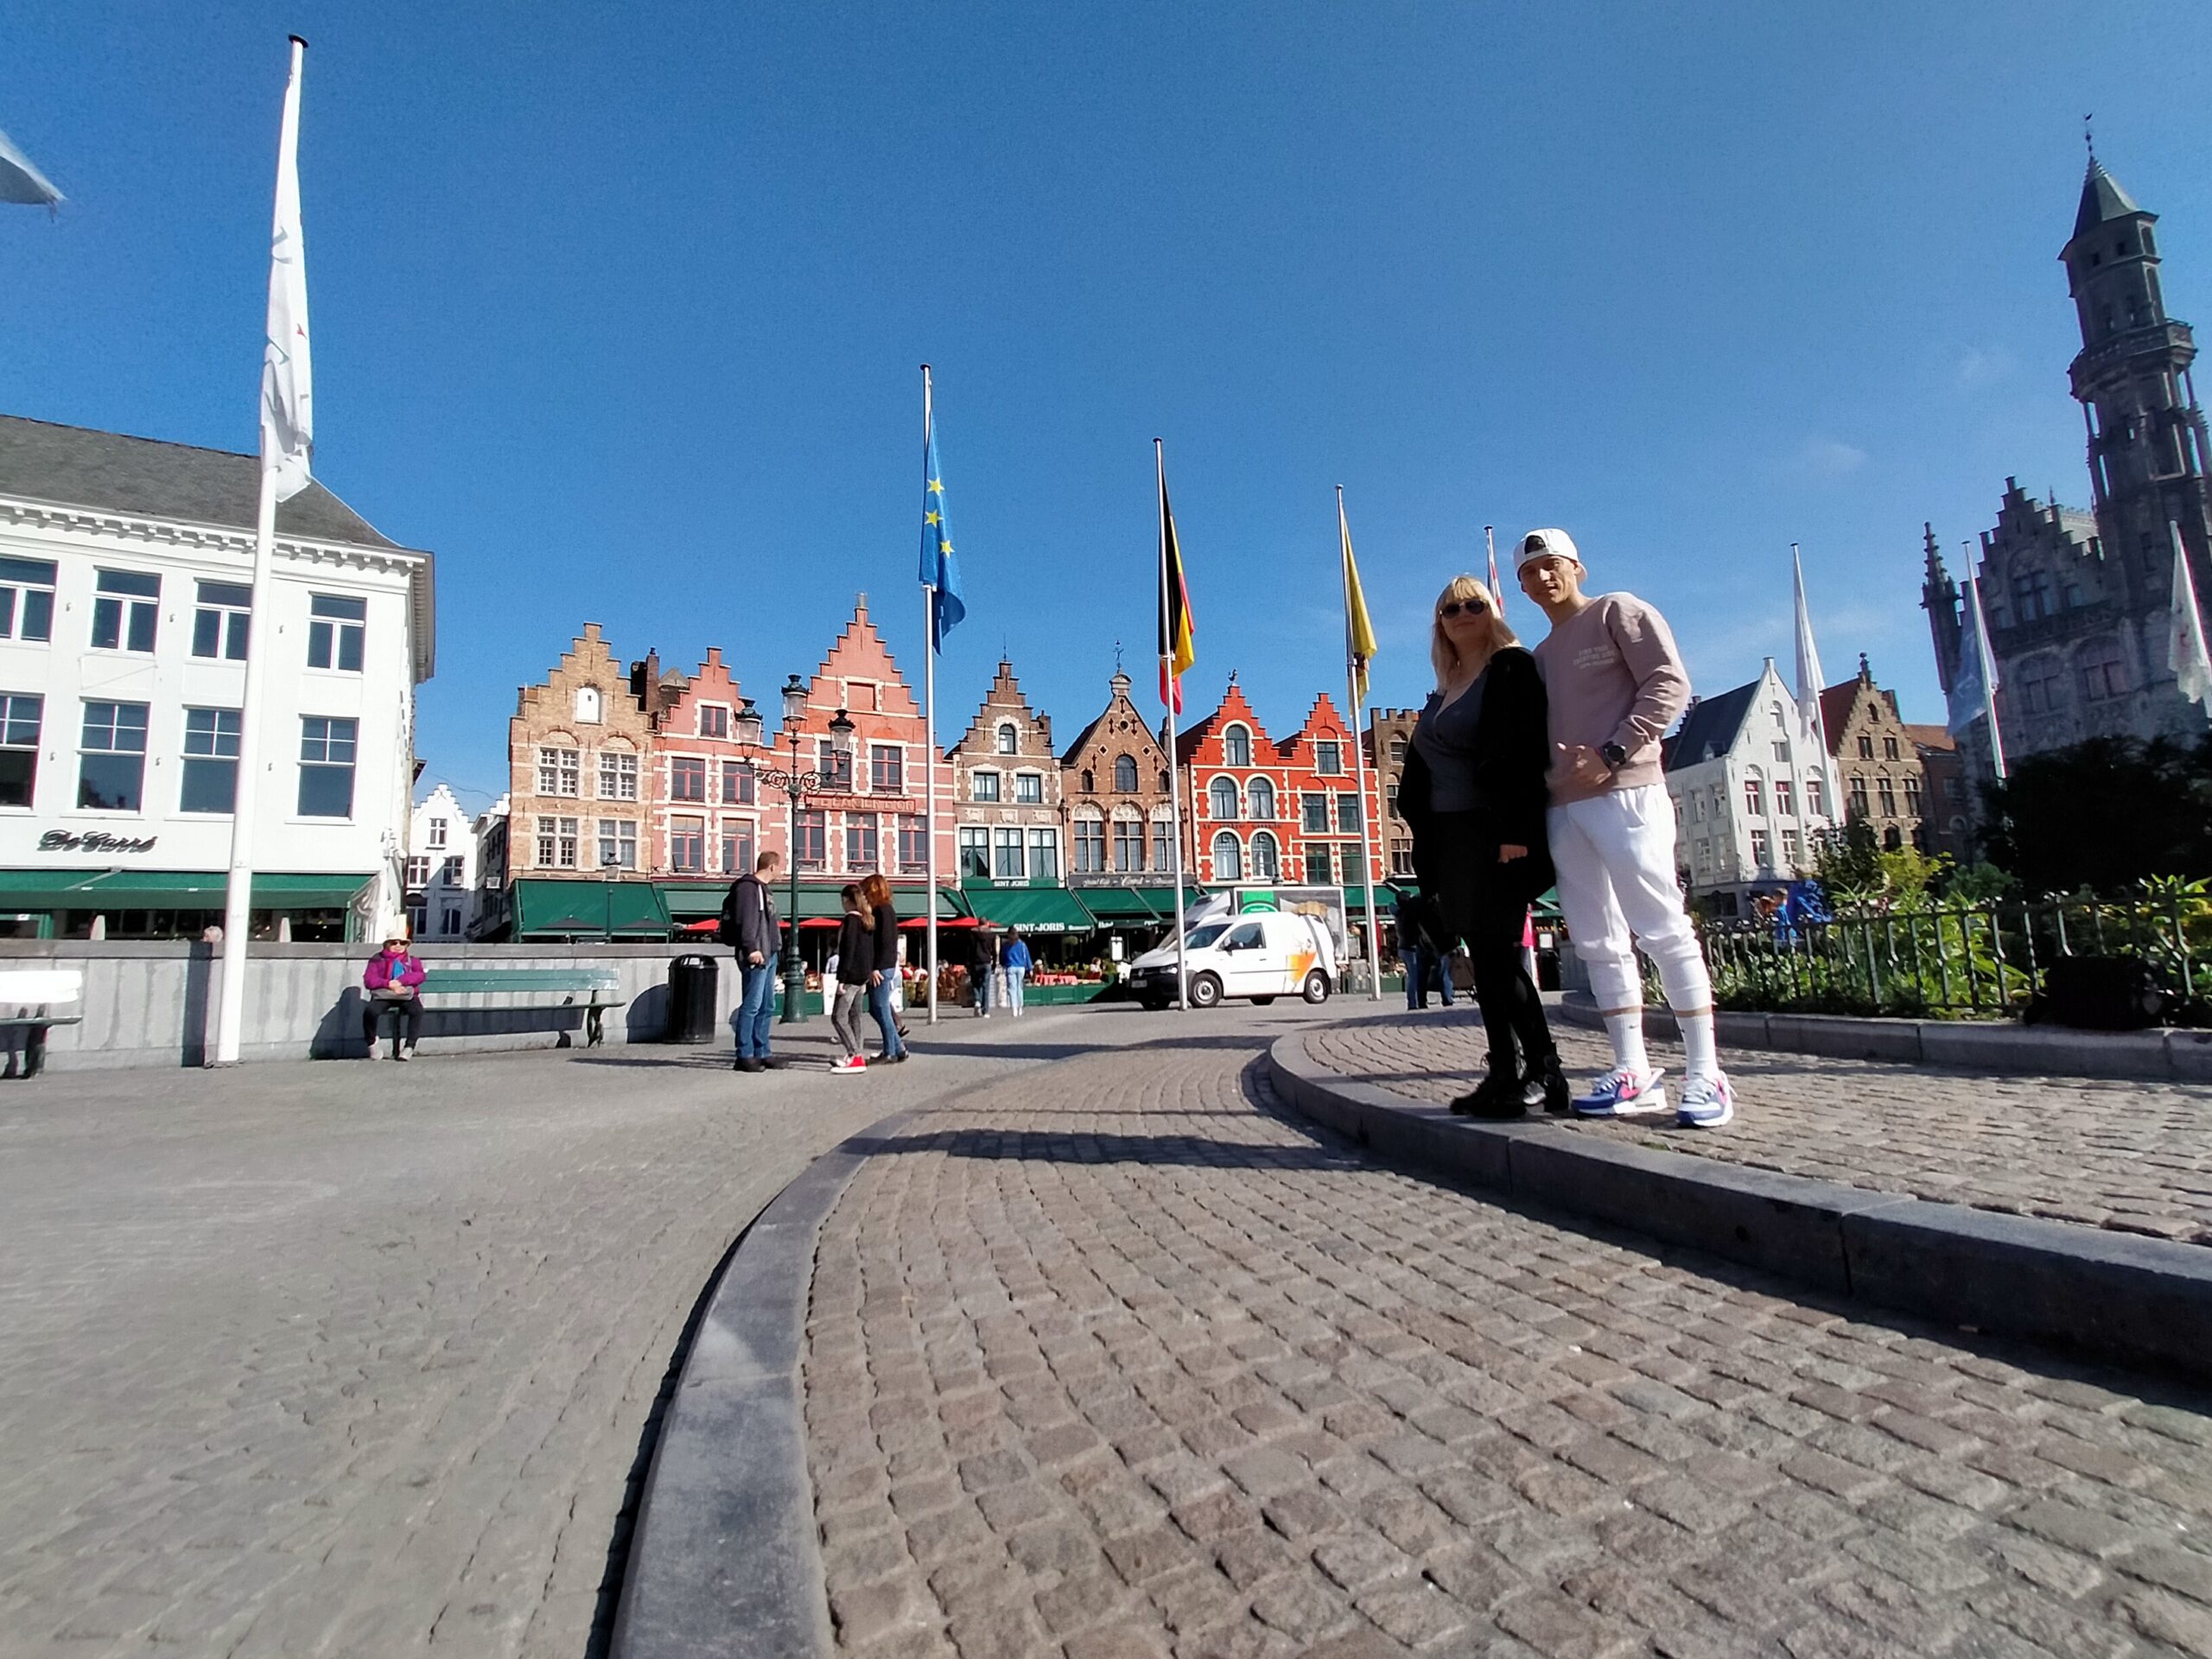 The Grote Markt